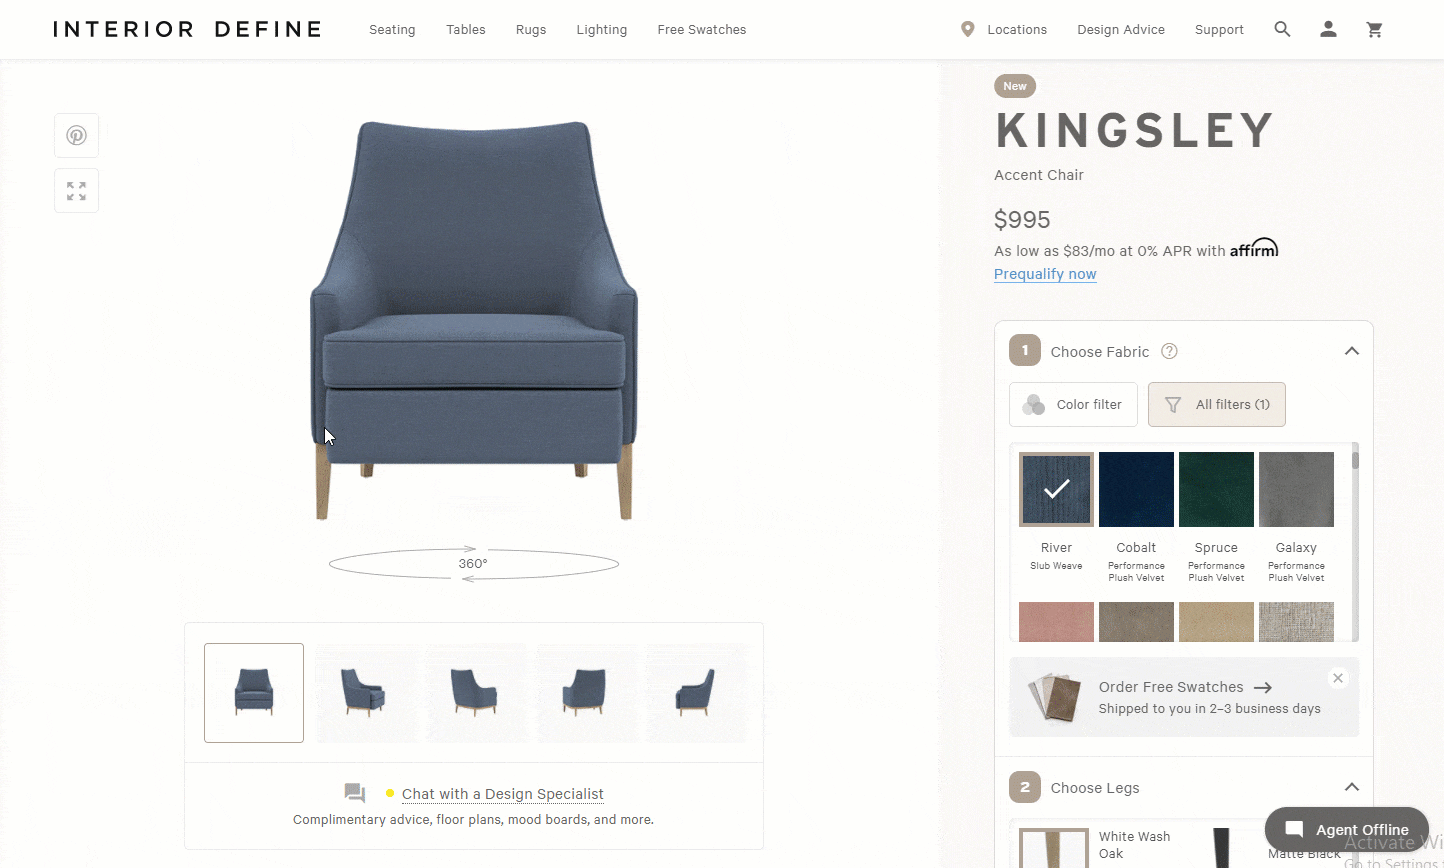 interior-define-product-page-360-views-kingsley-accent-chair